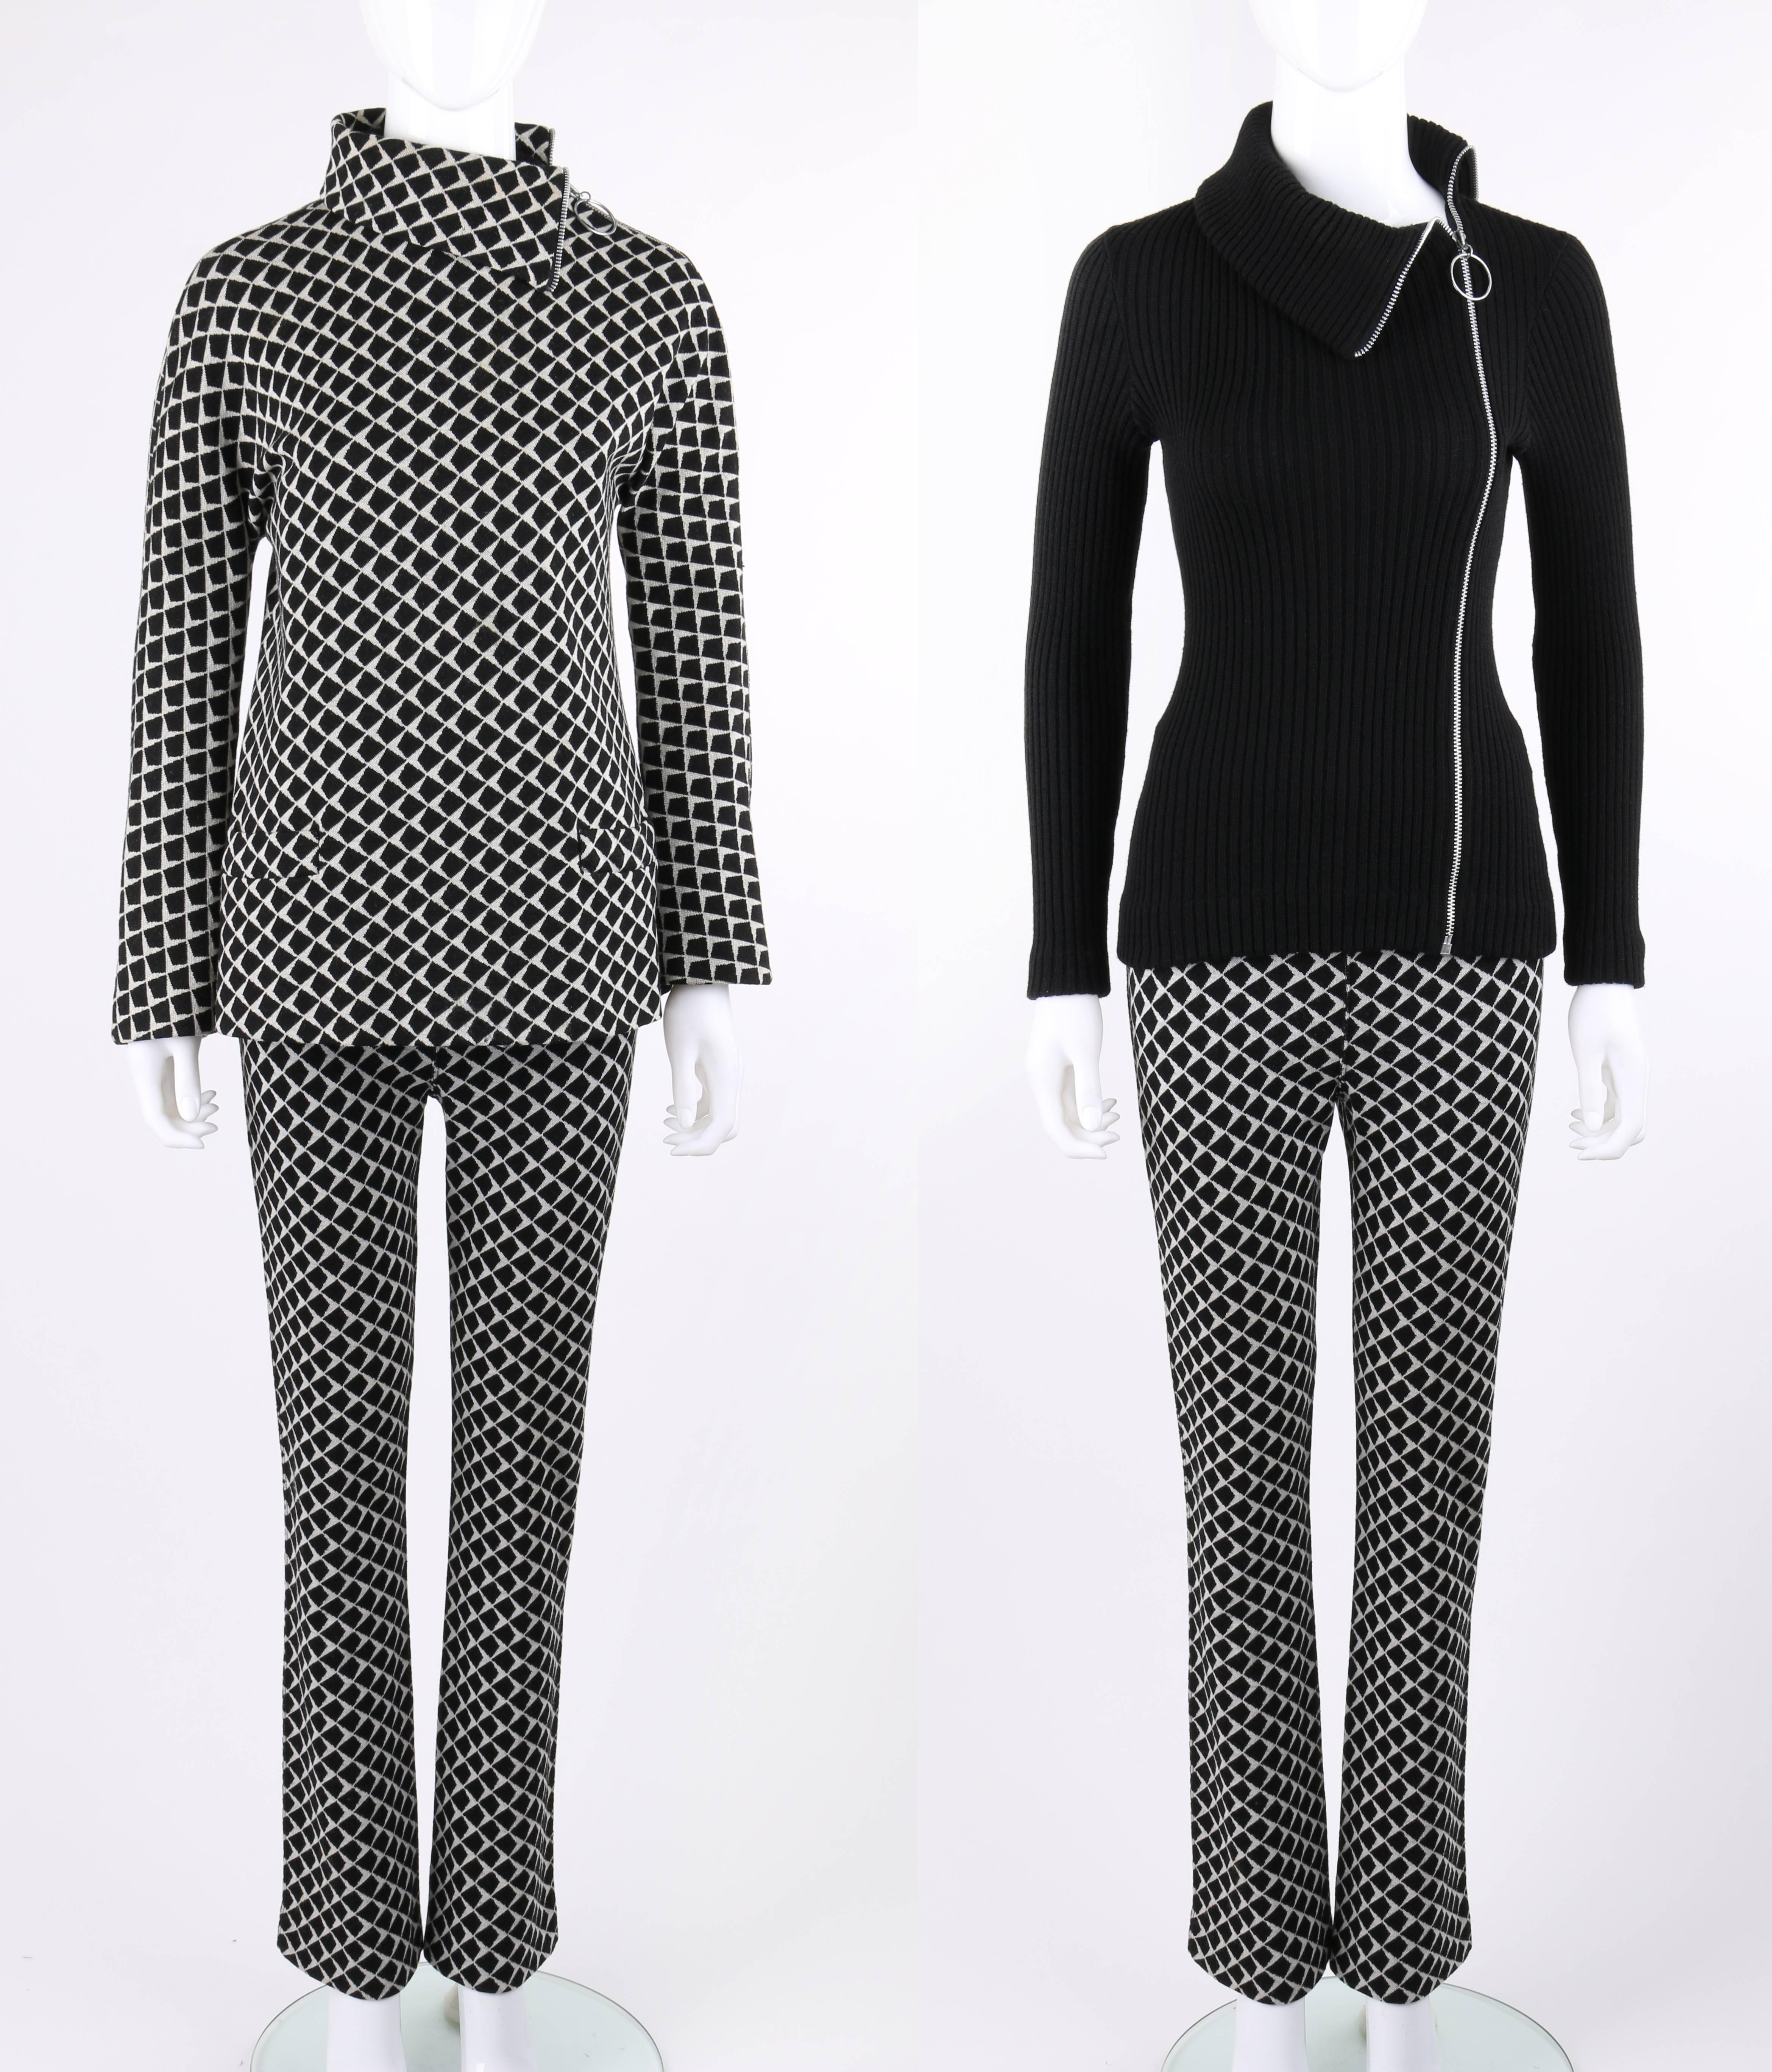 Vintage Rudi Gernreich for Harmon Knitwear c.1960's mix-n-match three piece black and white wool knit mod pant suit. Black and light gray geometric mod patterned wool knit jacket. Left side metal zipper closure from collar to above sleeve cuff with